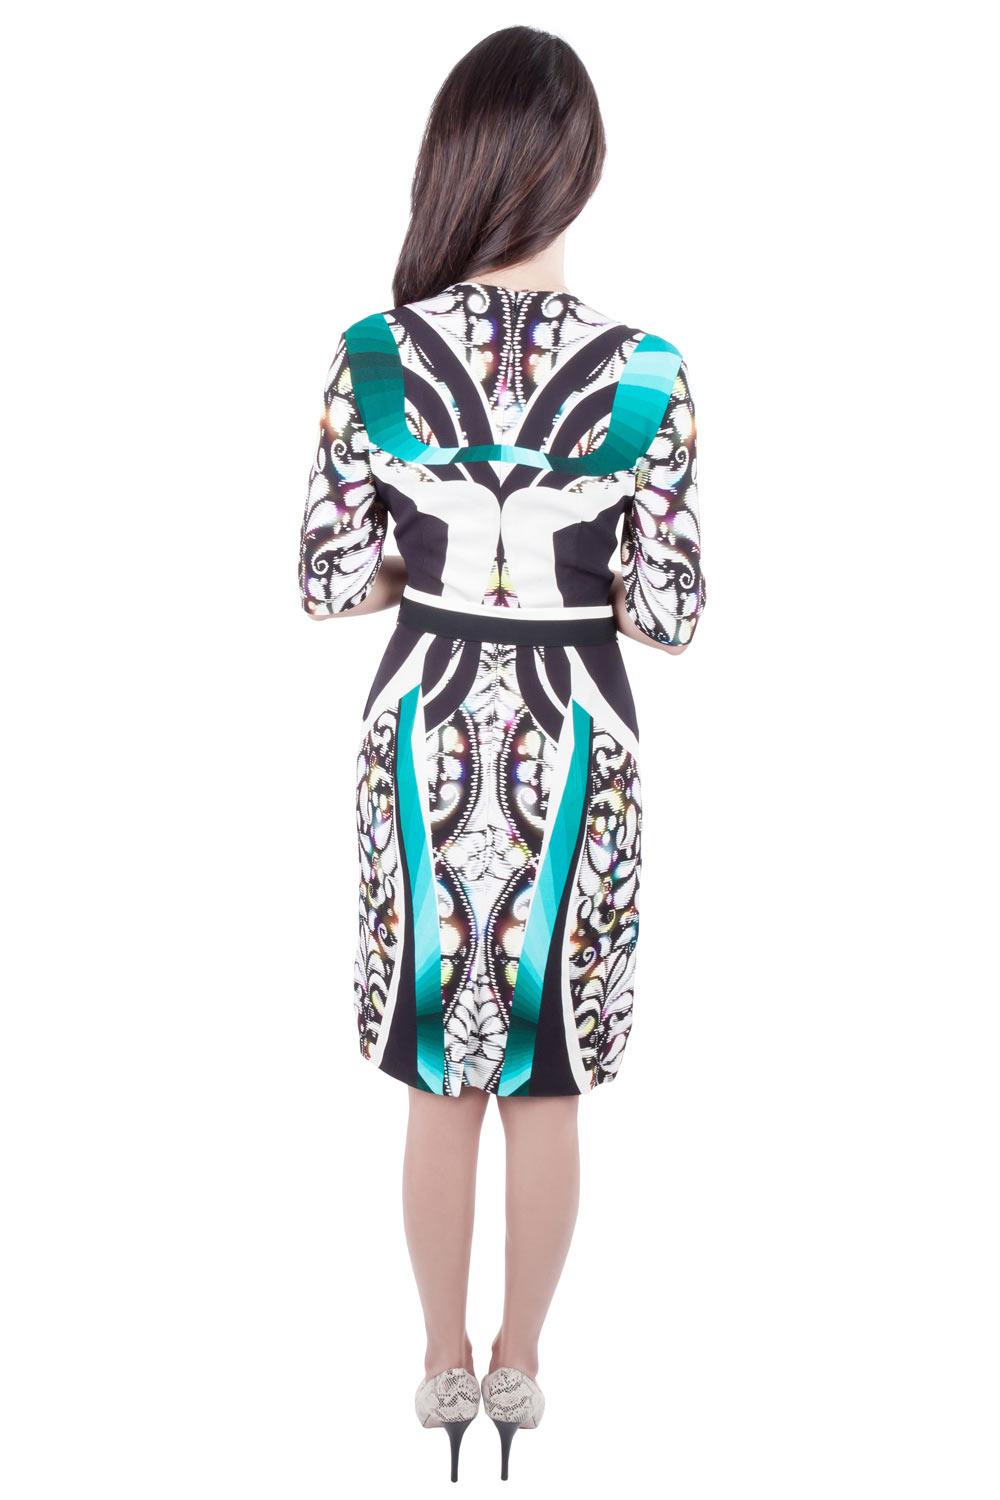 Designed by Peter Pilotto, this sheath dress was launched as part of the Fall 2013 collection. Featuring a digital print, the multicolor creation comes with a belted detail, short sleeves and zip closure. It is simple yet very unique.

